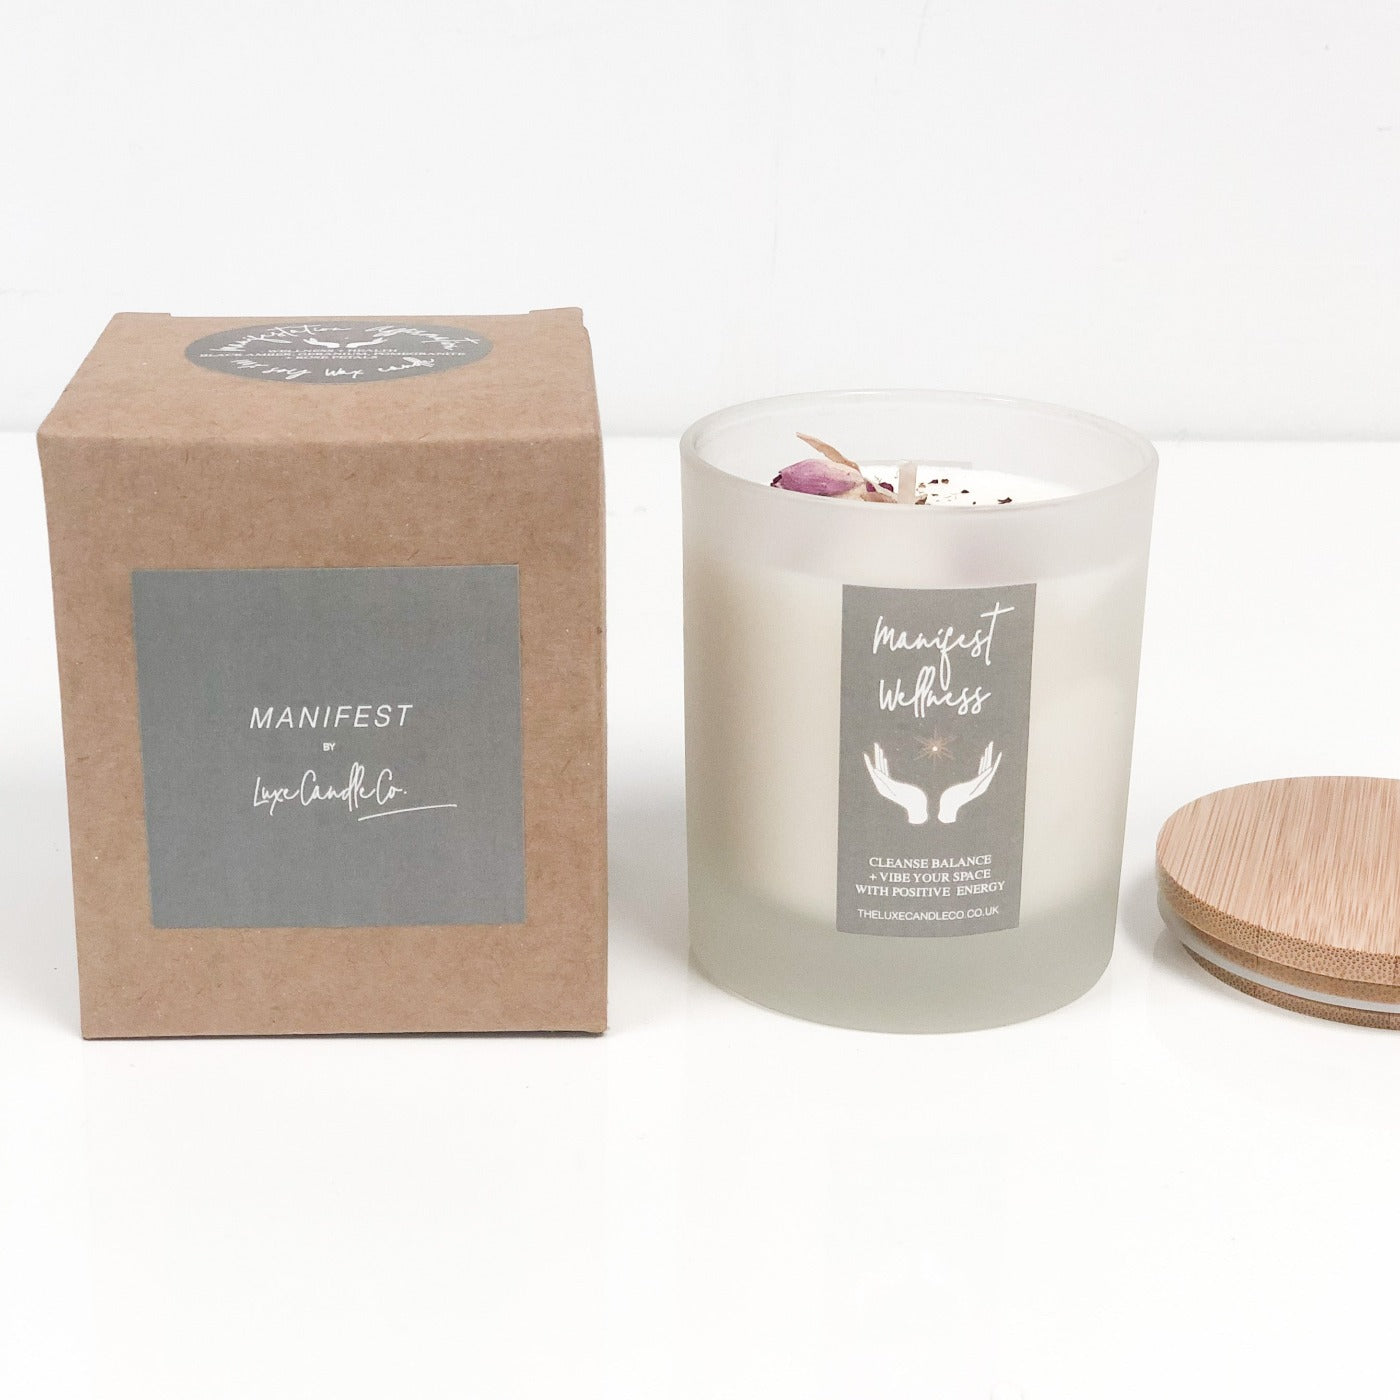 Manifest Health Candle | Wellness Candle to manifest wellness, health, vitality, energy boost | The Luxe Candle Co